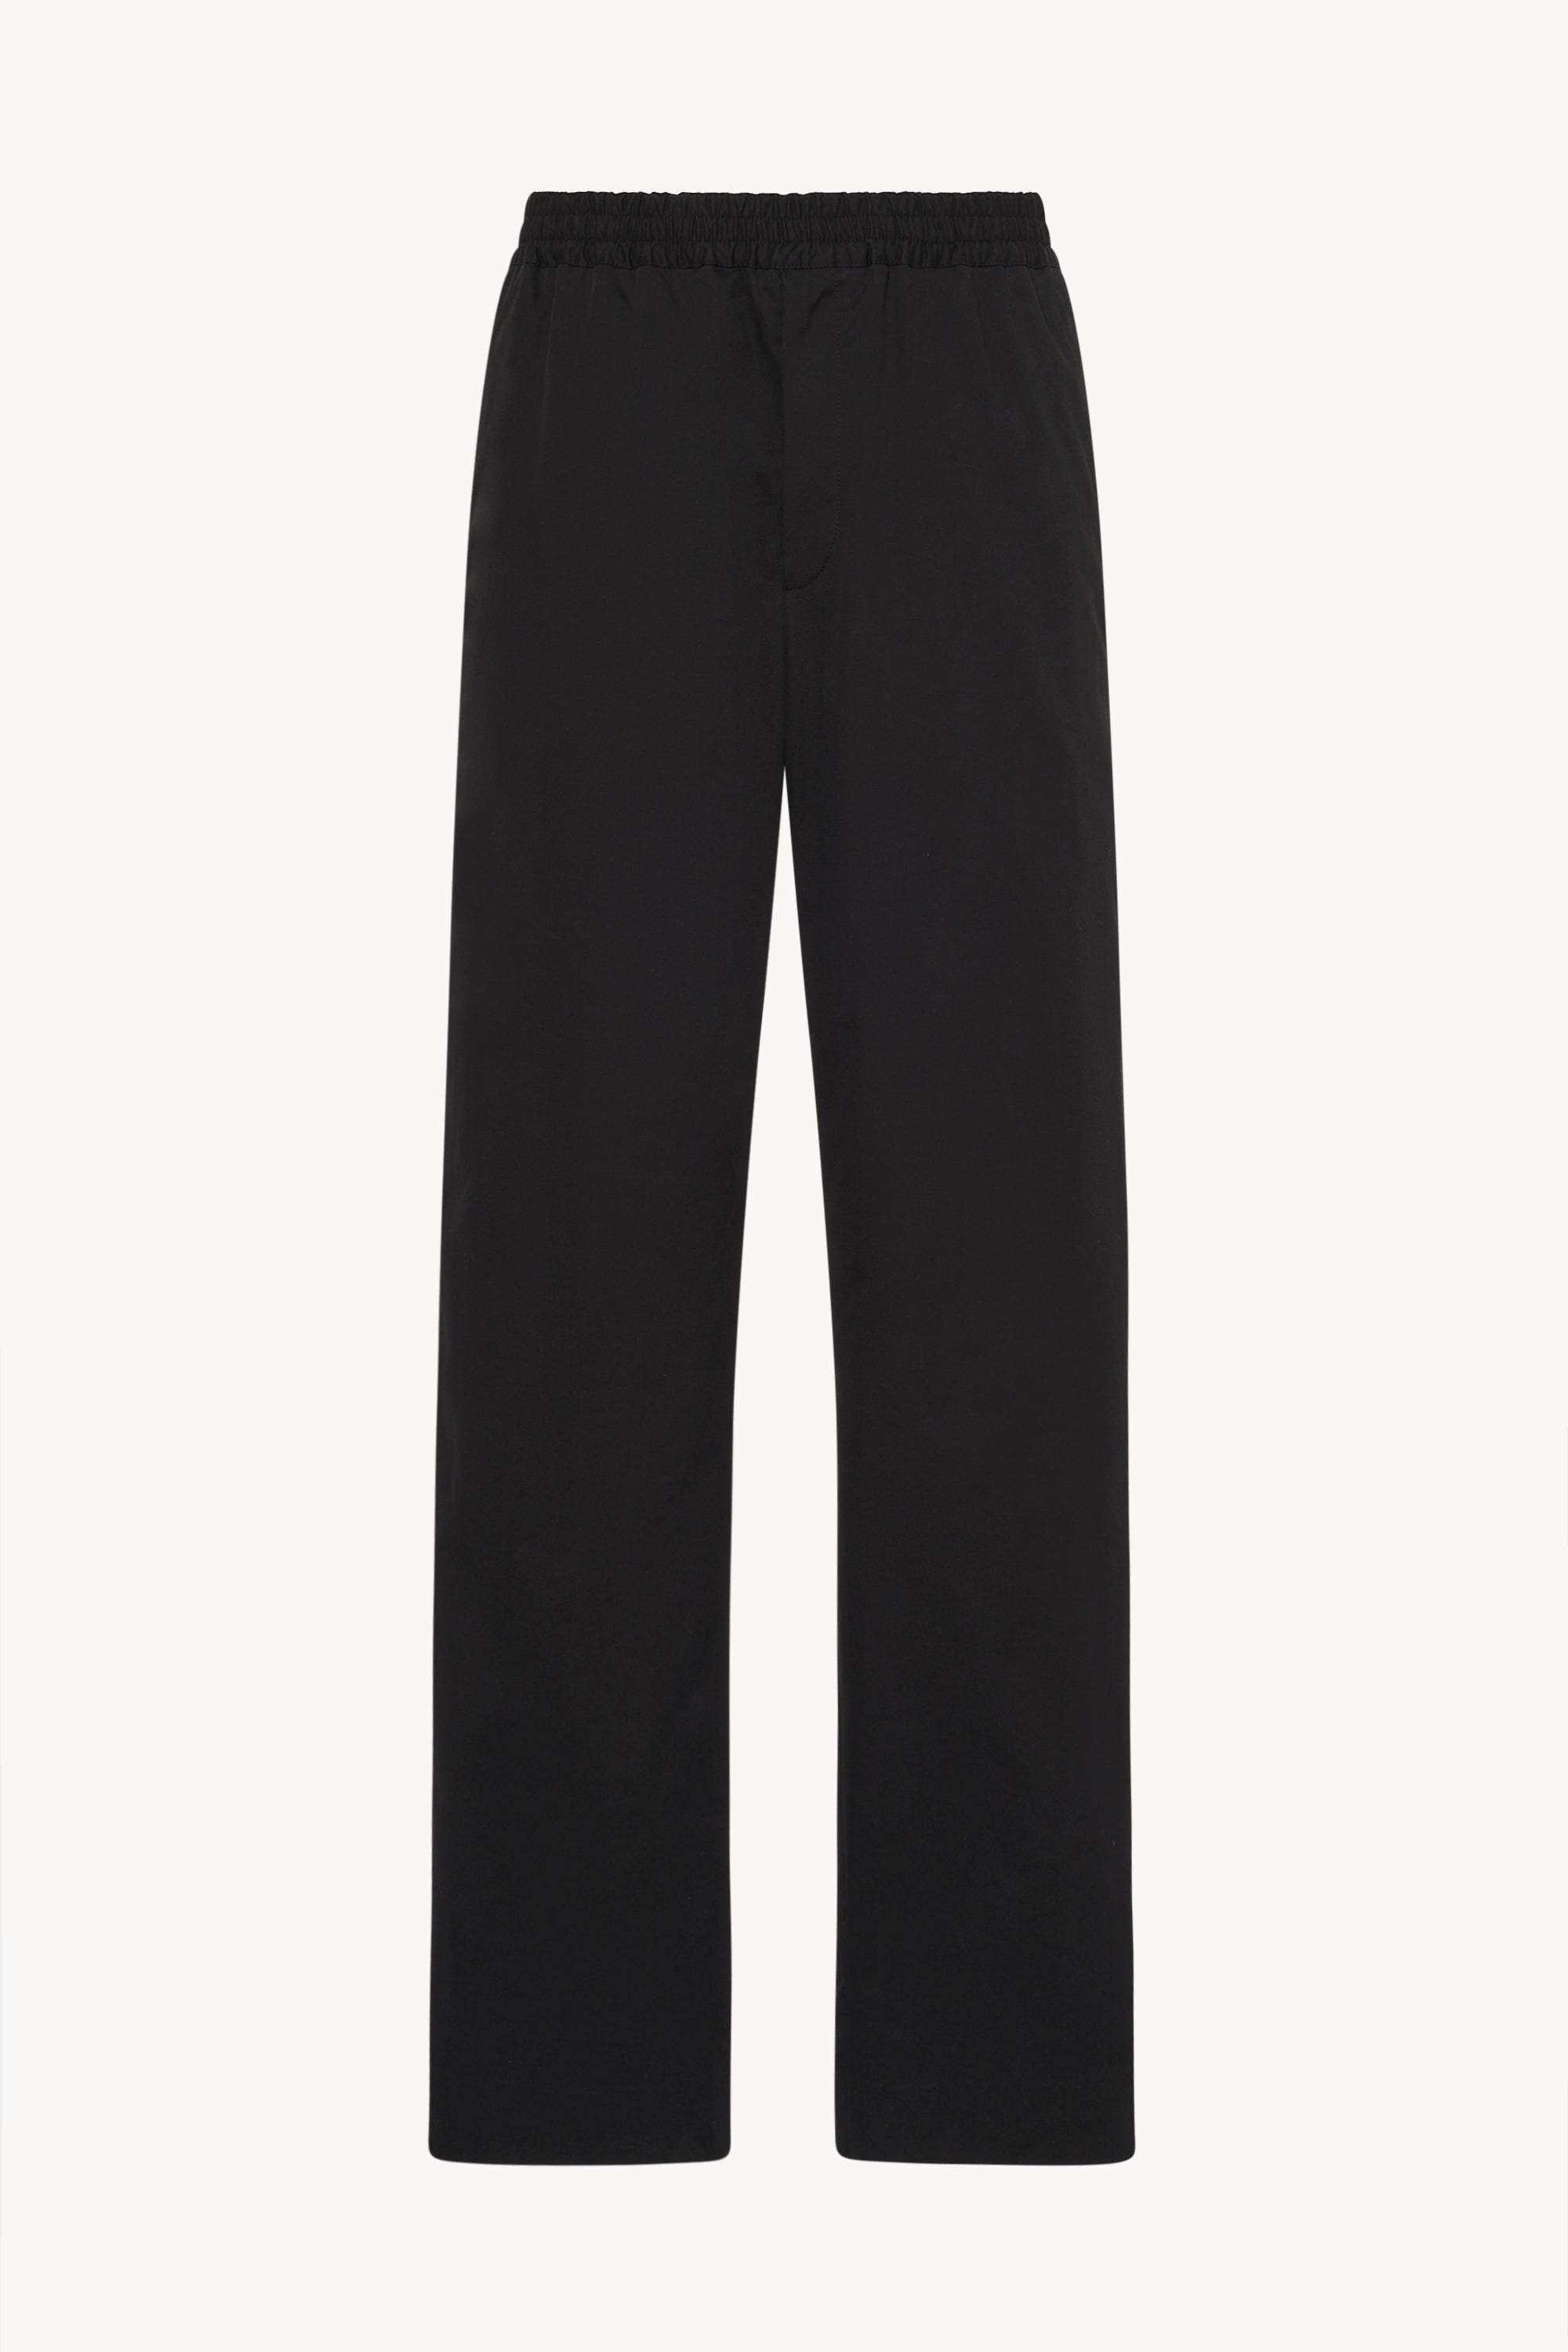 Jonah Pant in Cotton and Cashmere - 1